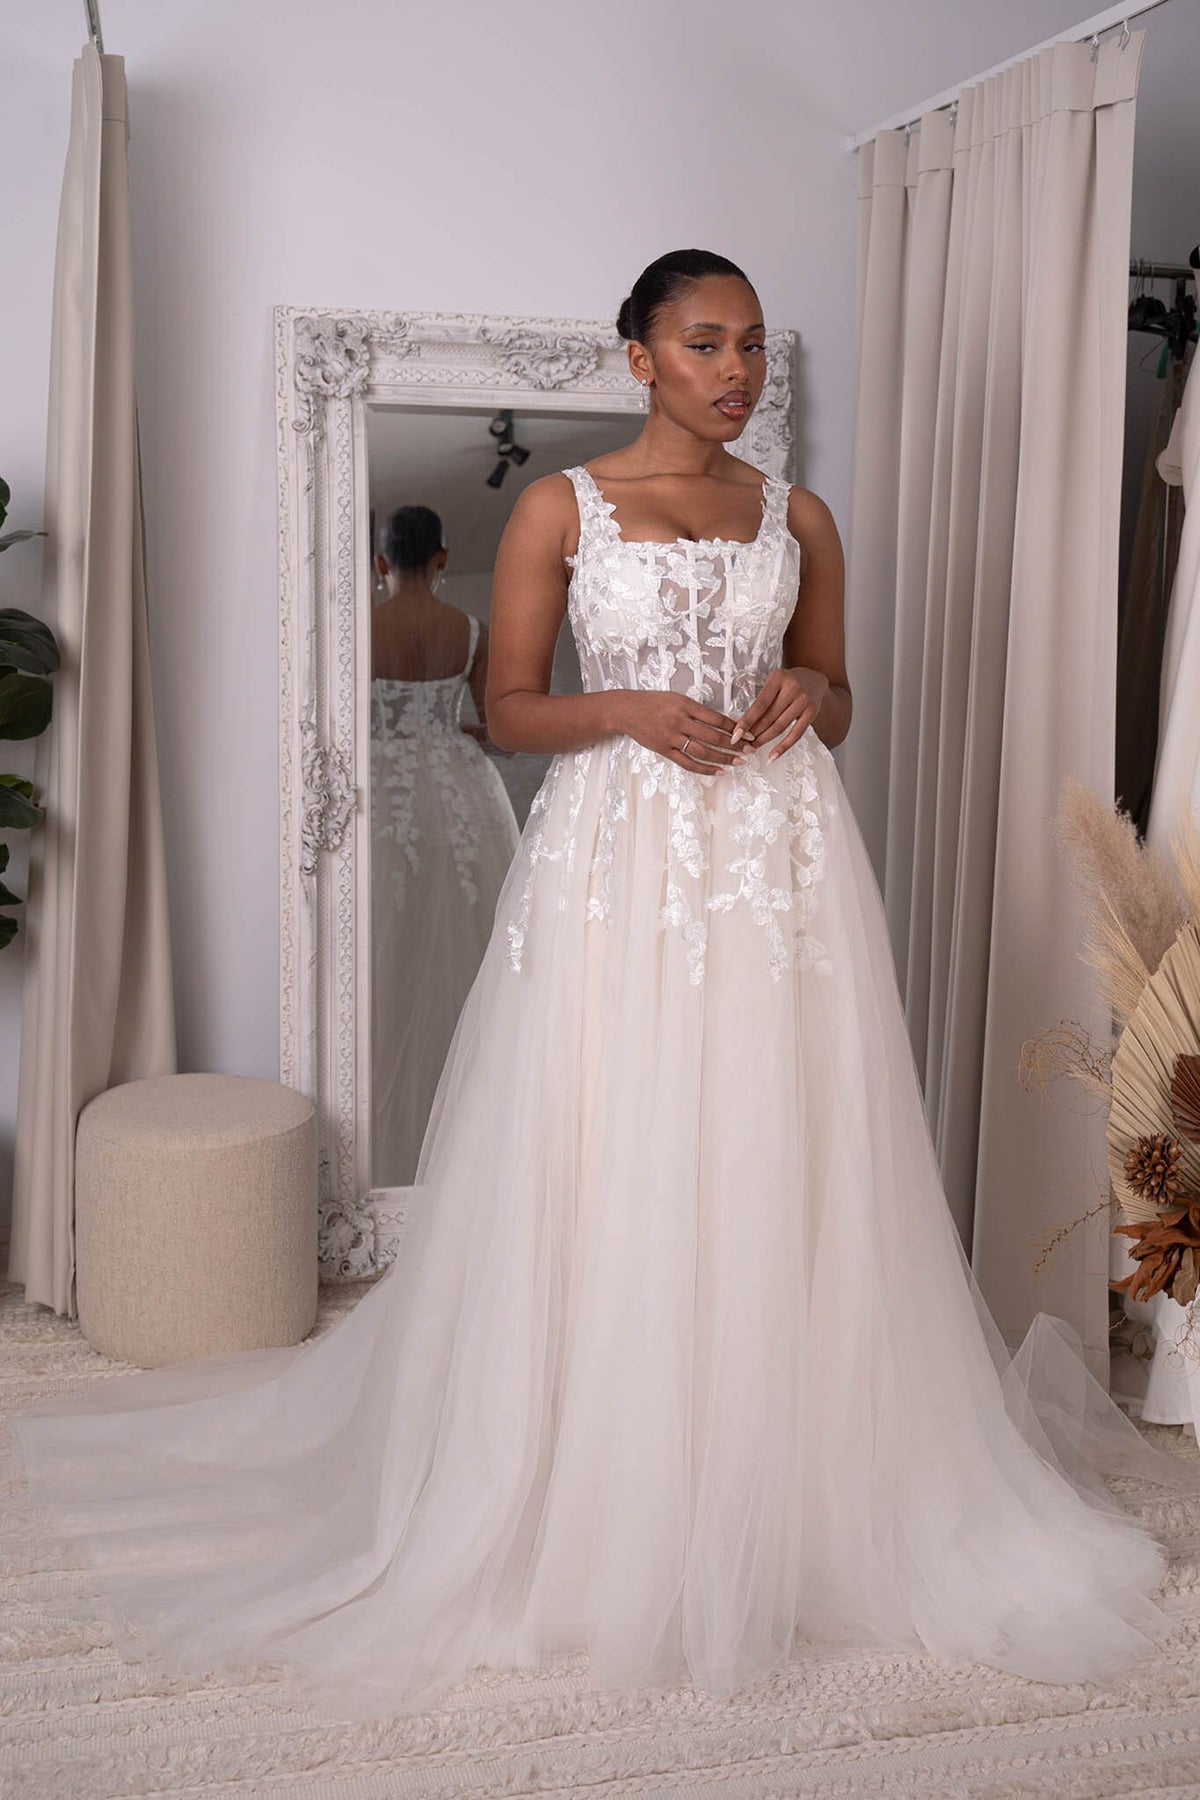 Ivory Off-White Square Neck A-line Lace Wedding Gown with Floral Lace Motifs Embellished on Layered Tulle, Trendy Exposed Bone Bodice, Voluminous Full A-line Skirt and Flowing Sweep Train